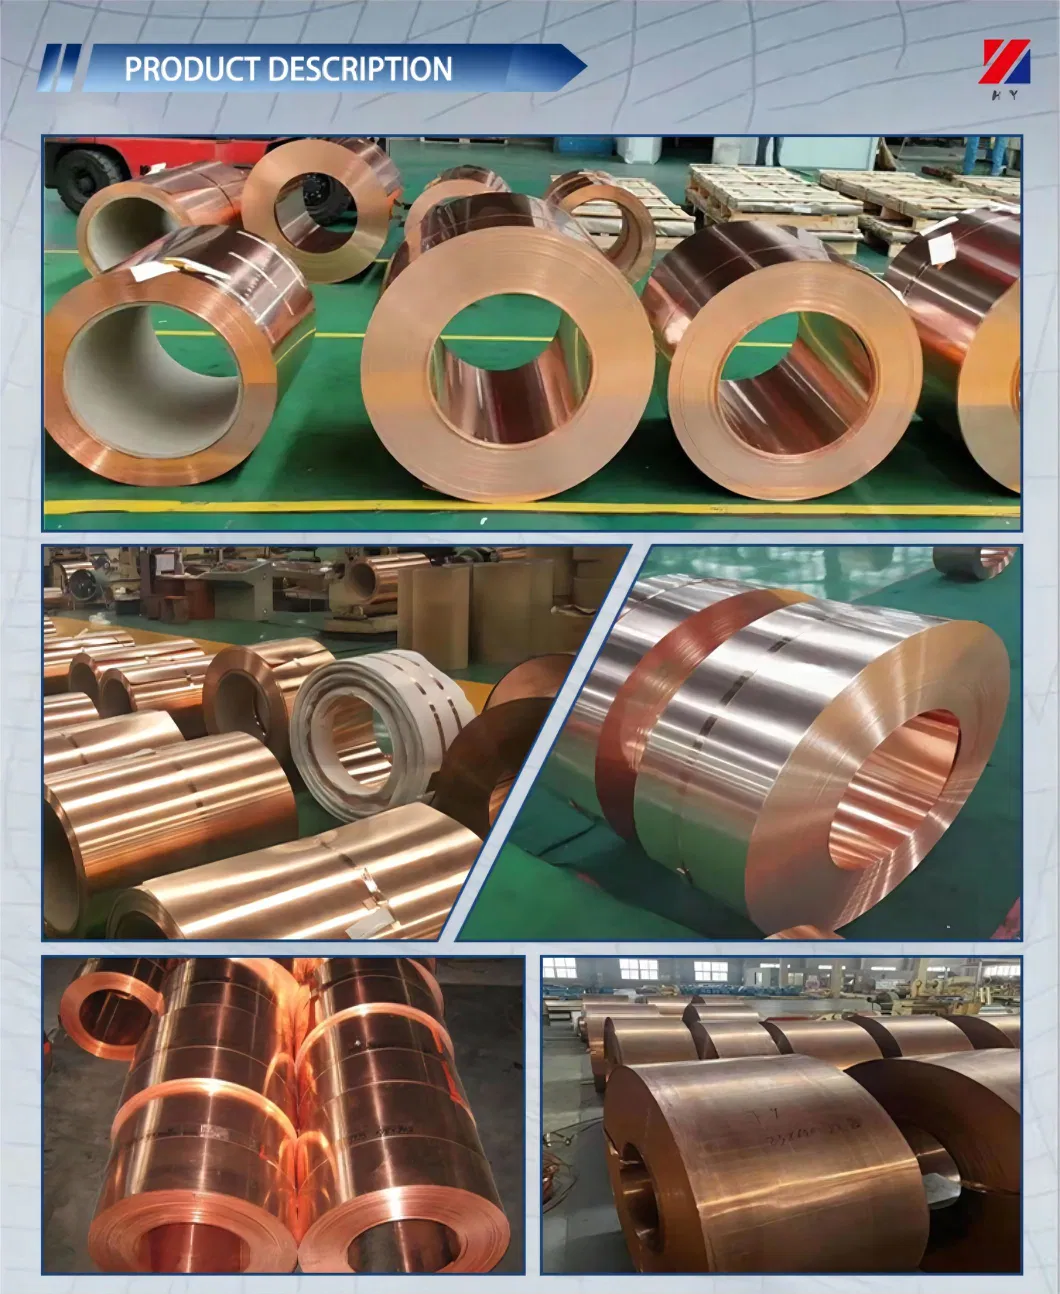 100-700 Series C10000-70000 Copper/Brass Coil/Strip/Plate/Sheet/Tube/Pipe/Bar Round/Square/Rectangle/Flat Bar Tubes Pipes Wire Rod Roll